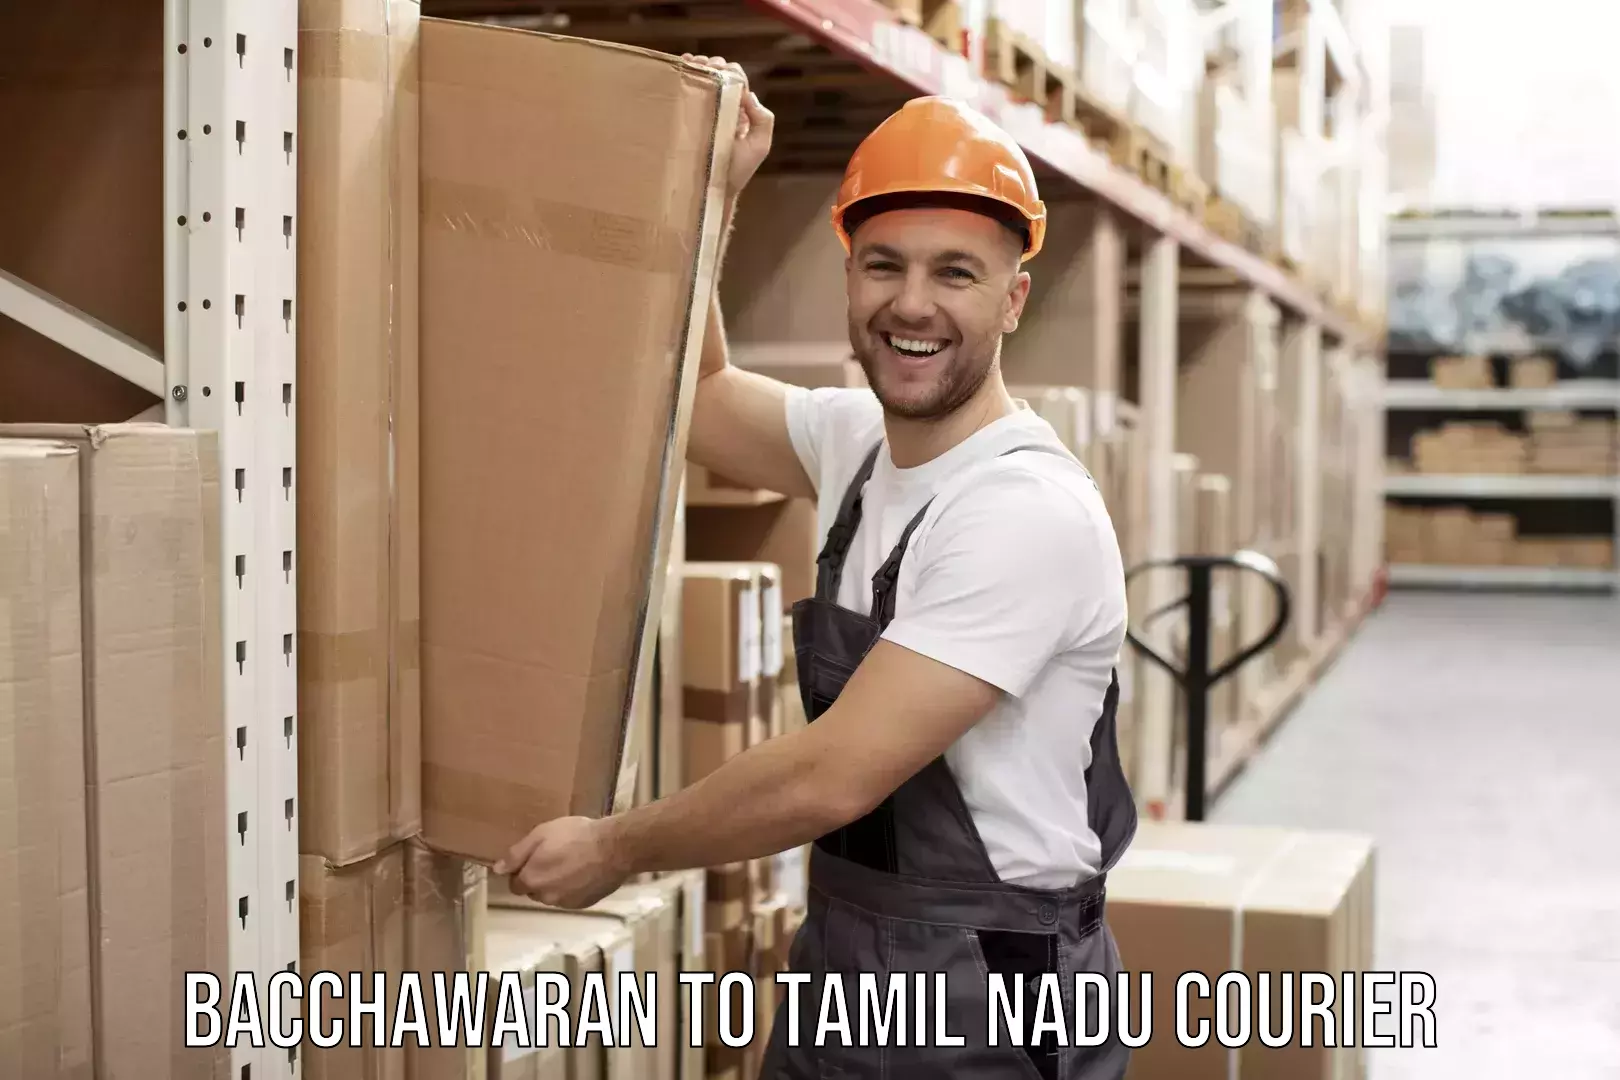 Tailored moving services Bacchawaran to Tamil Nadu